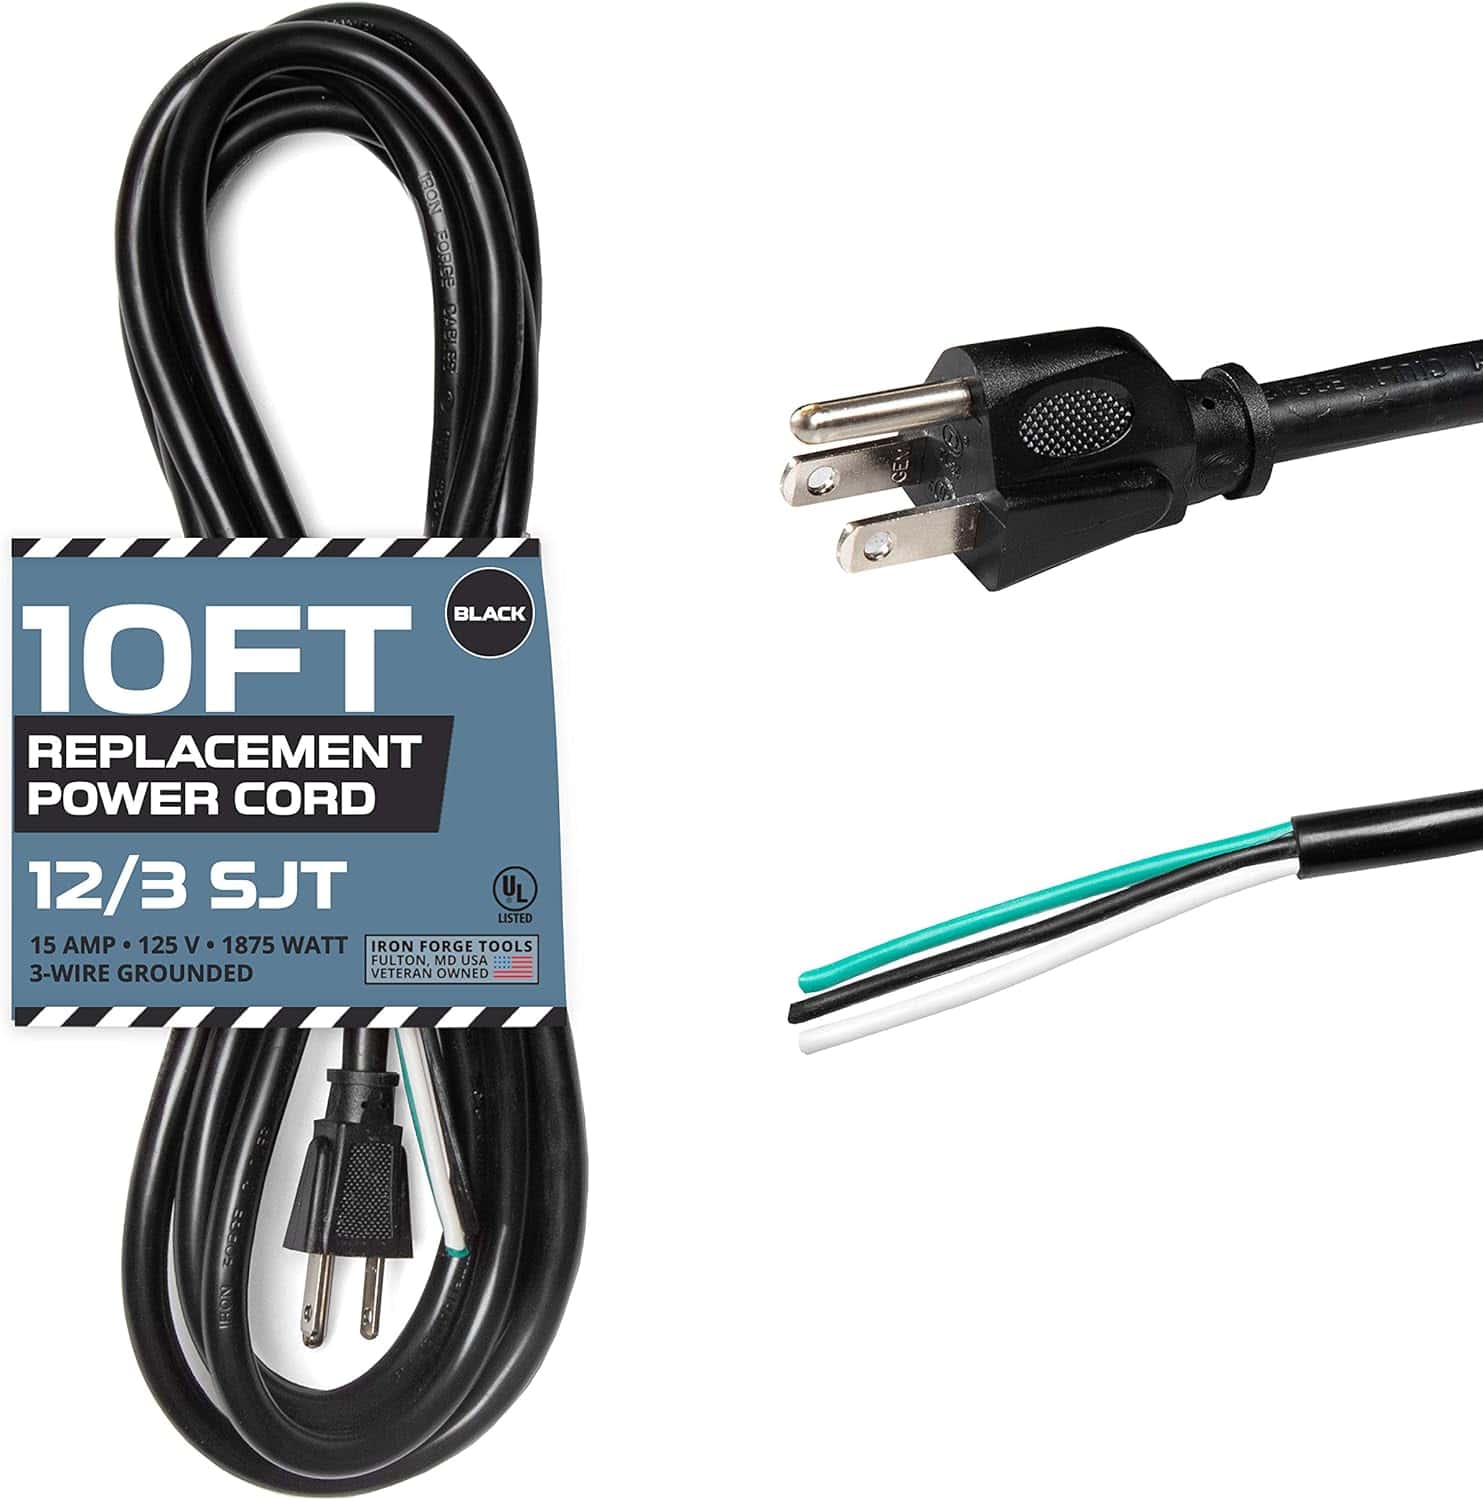 12-AWG-Replacement-Power-Cord-with-Open-End-10-Ft-Black-Extension-Cable-12-3-SJT-NEMA-5-15P